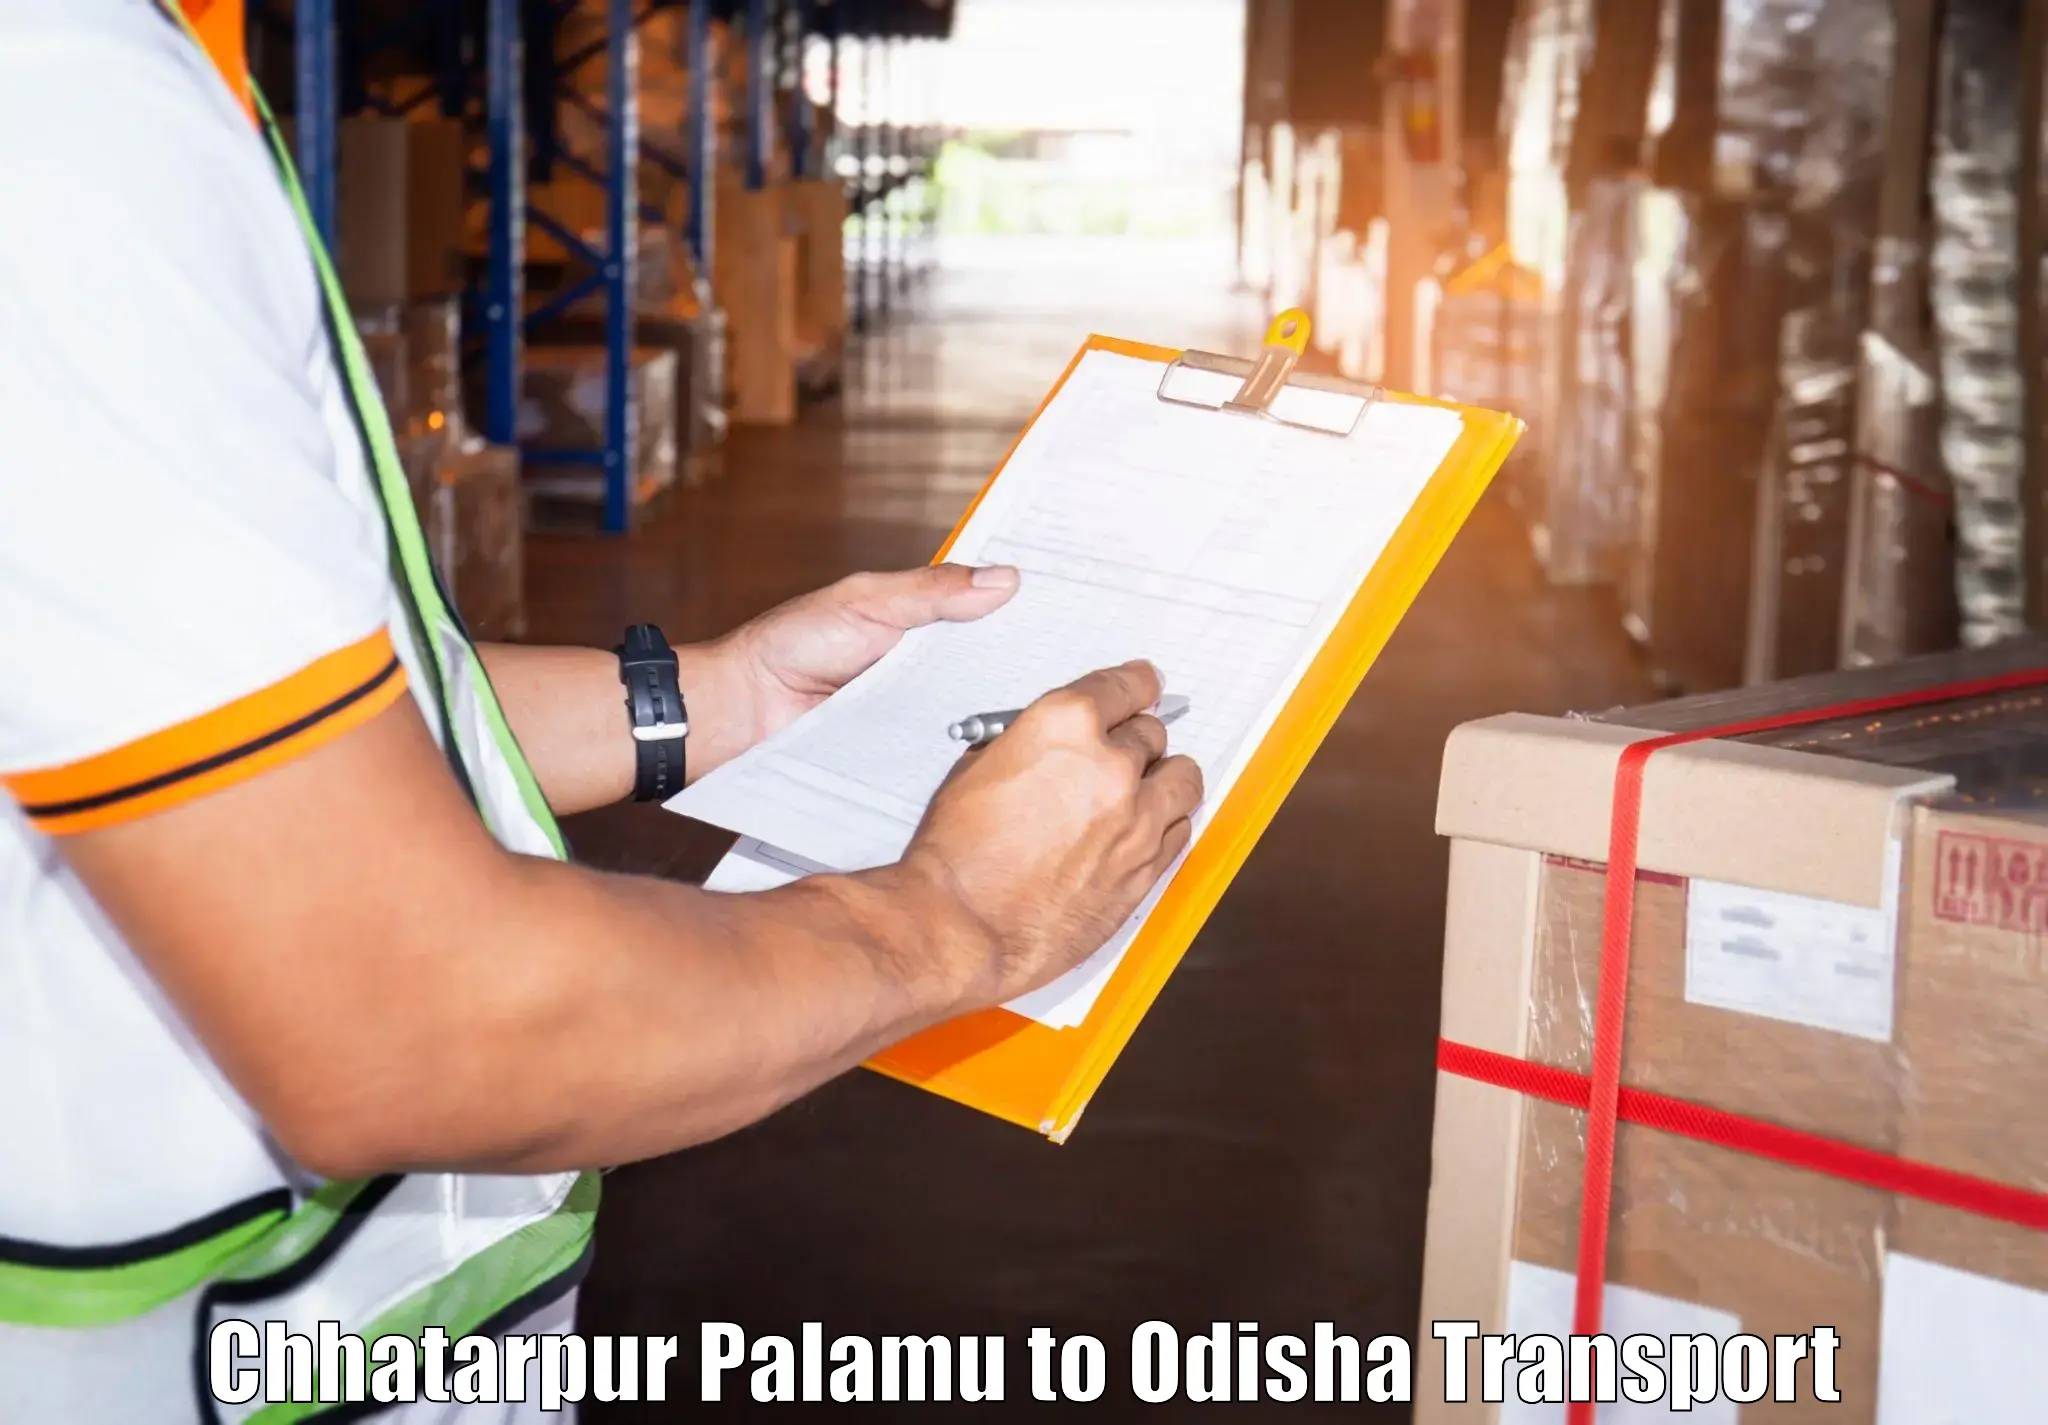 Package delivery services Chhatarpur Palamu to Pallahara